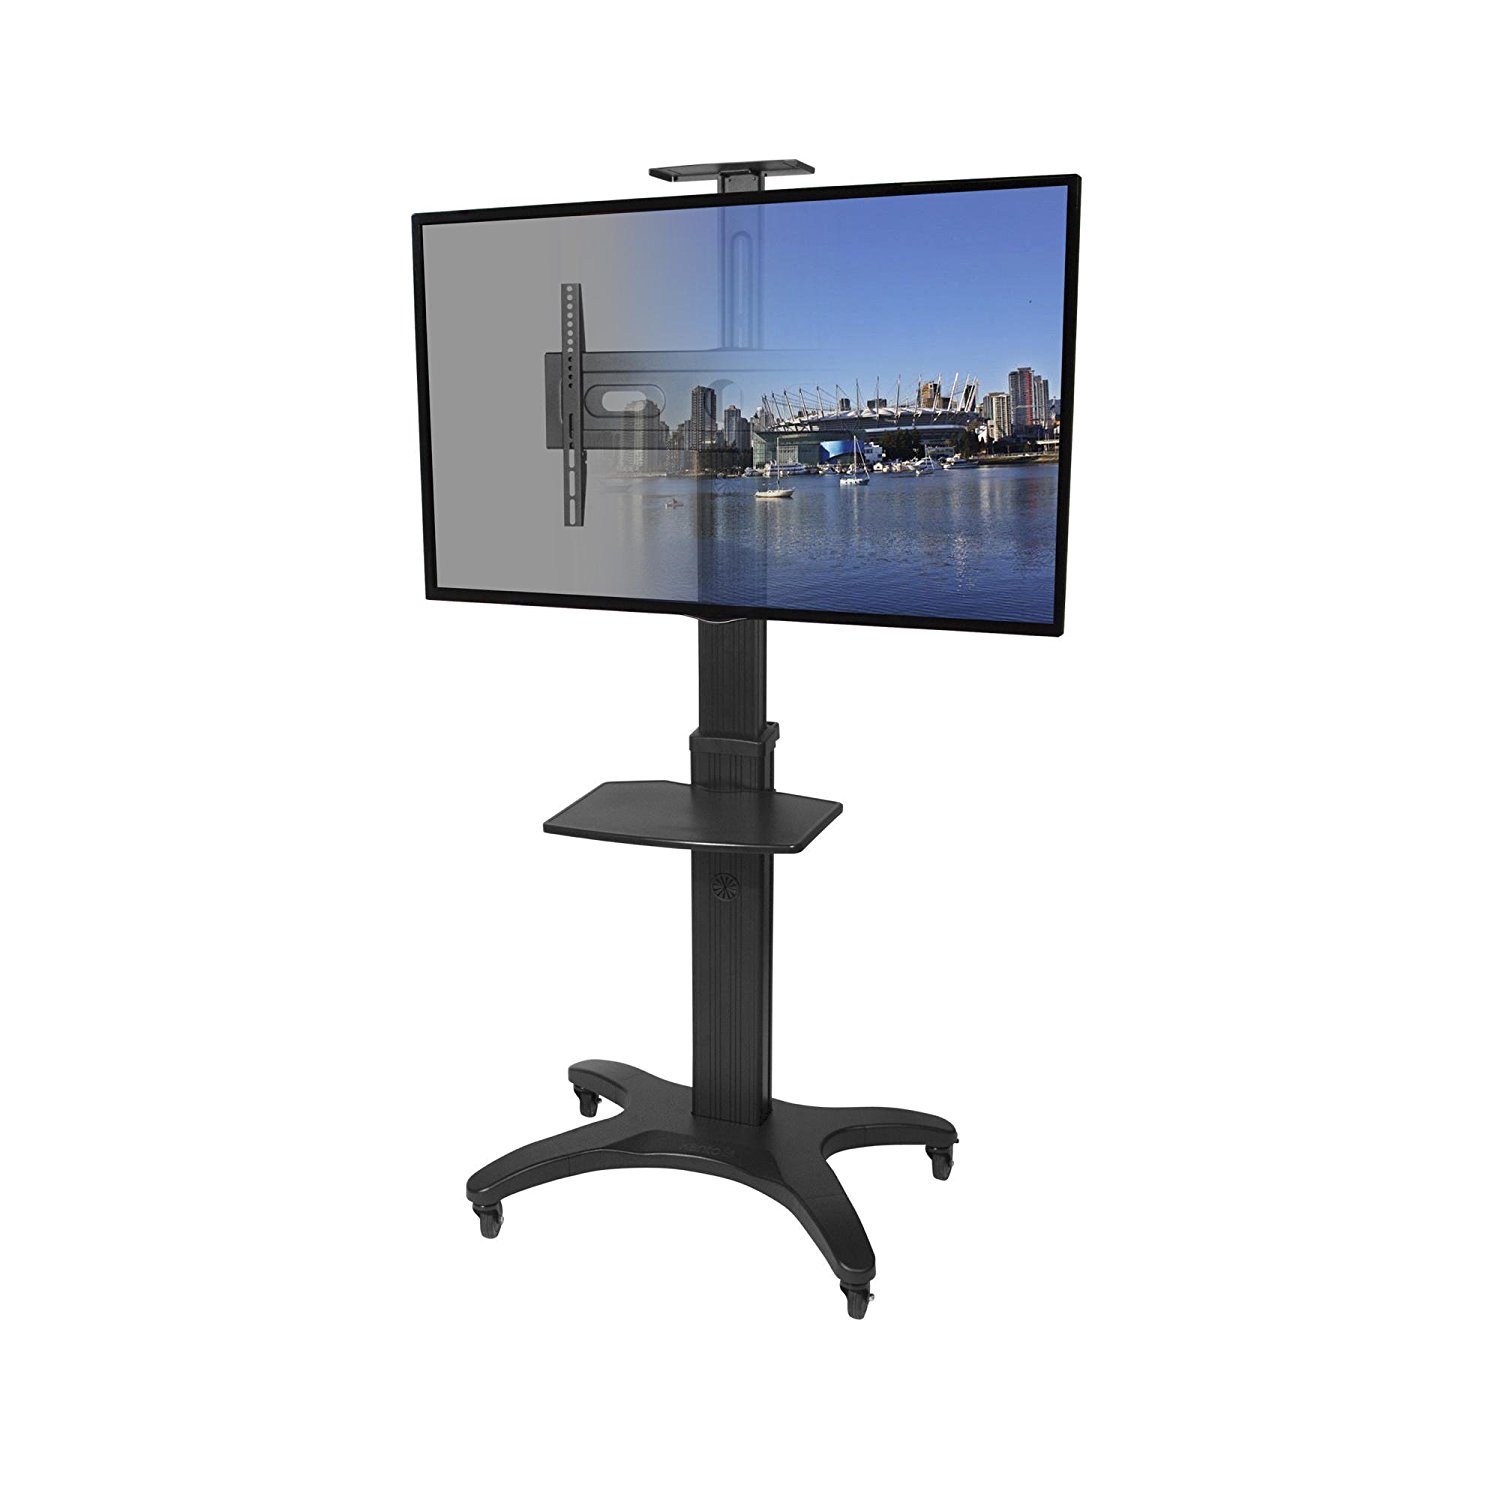 KANTO MTMA55PL MOBILE TV STAND FOR 32-35 INCH FLAT SCREEN DISPLAYS UNIVERSAL KEYBOARD TRAY AND TOP SHELF